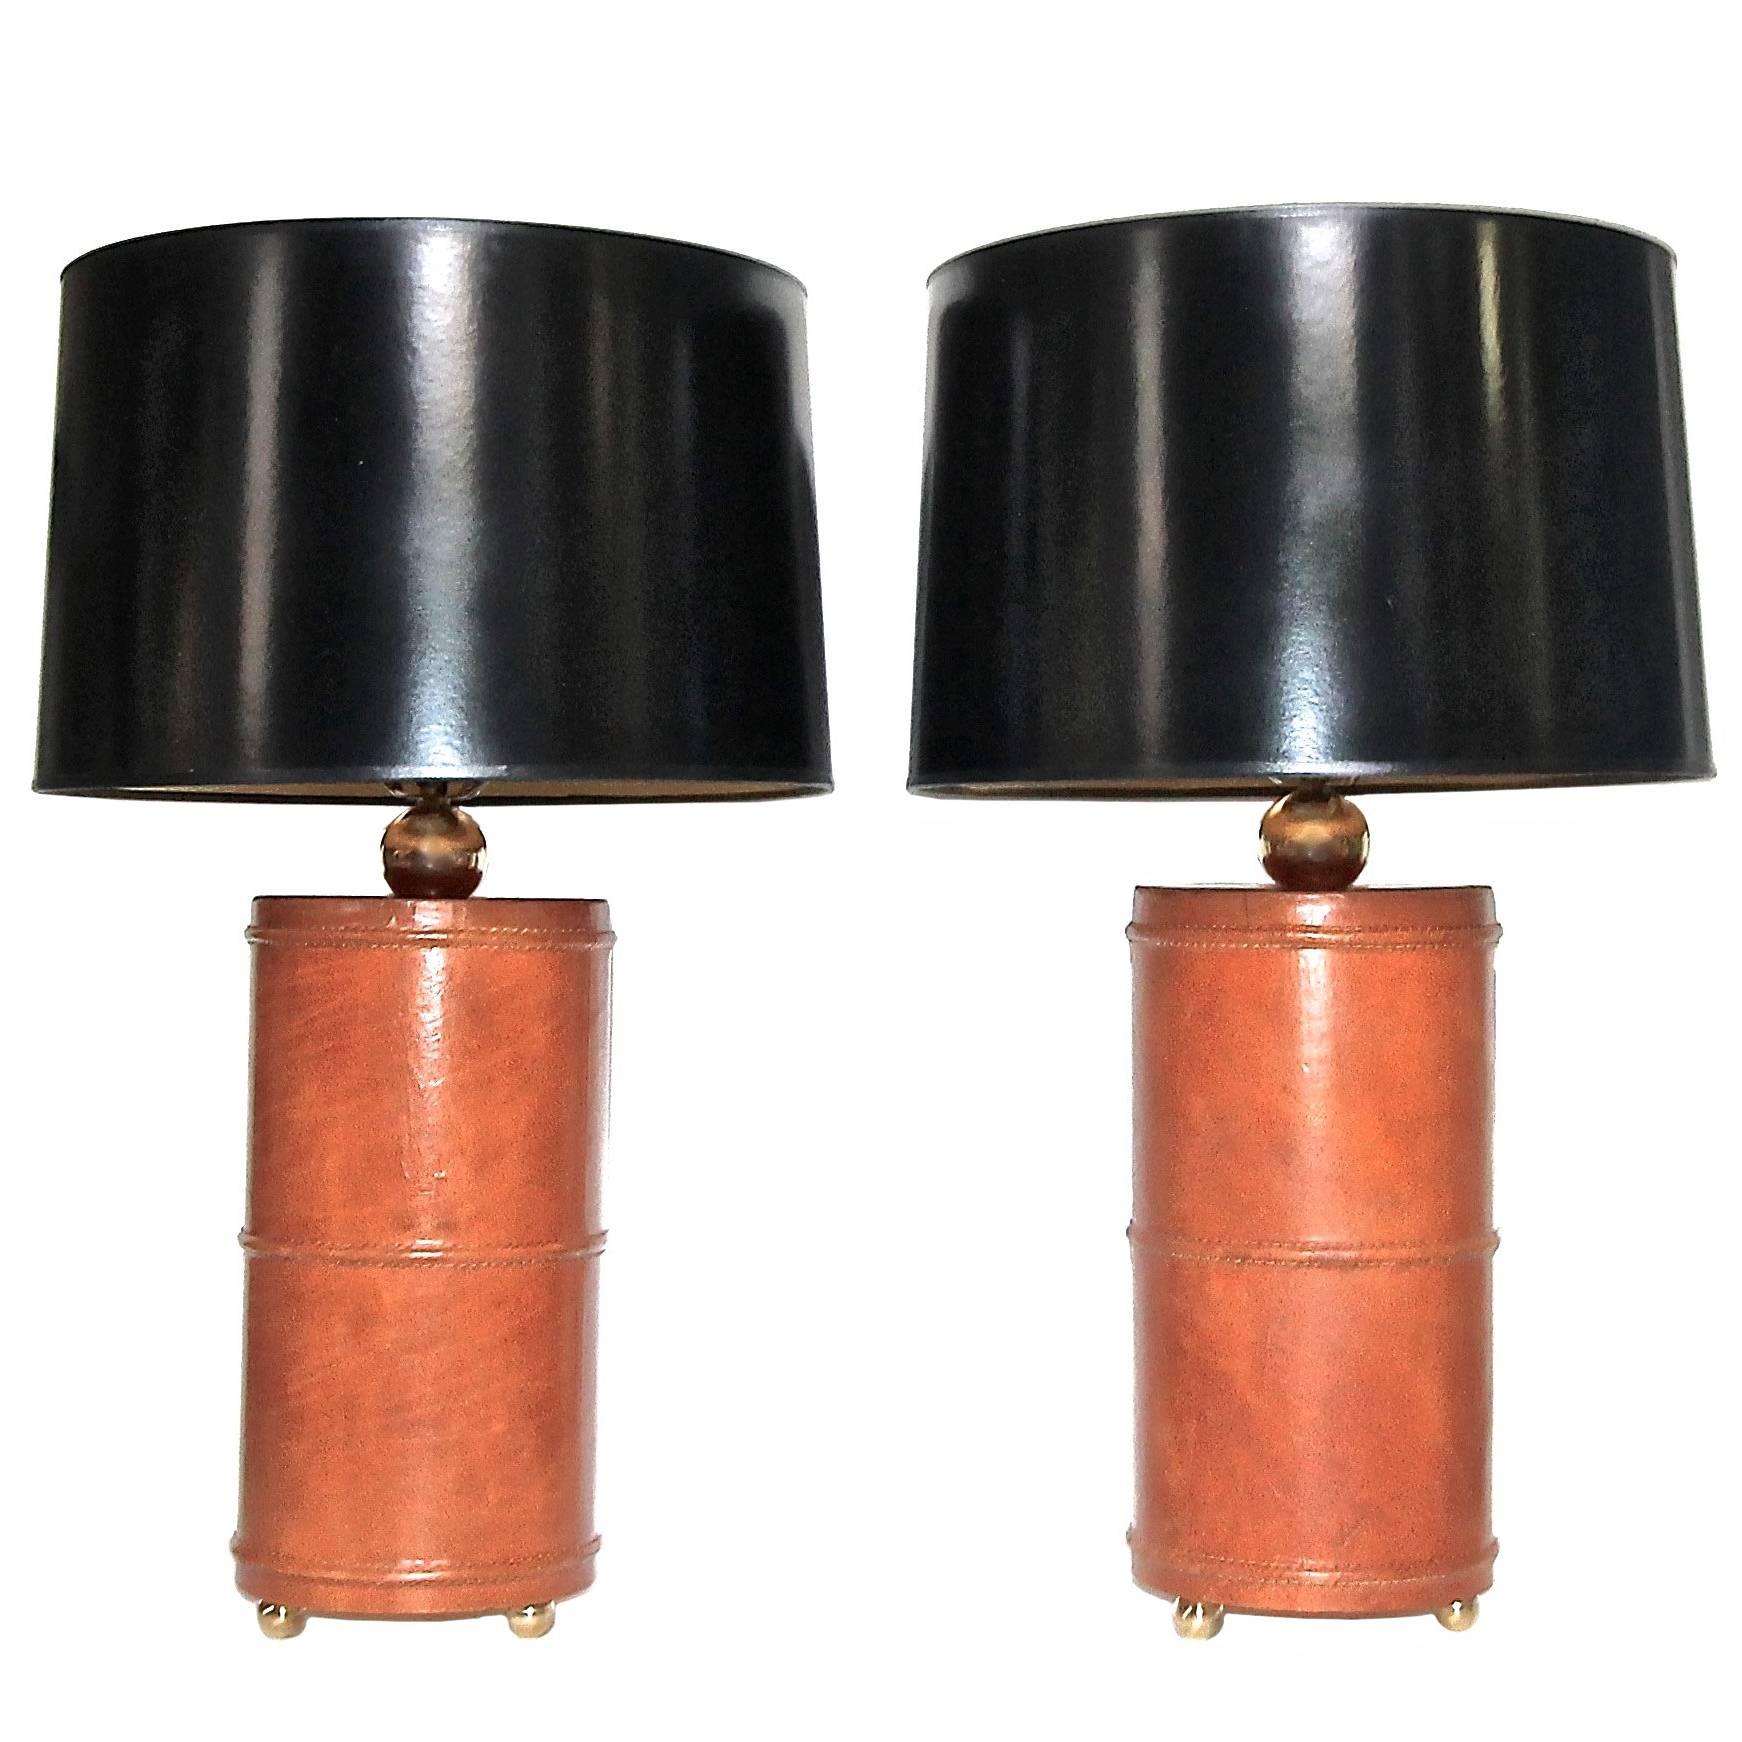 Pair of Stitched Leather and Brass Table Lamps after Adnet